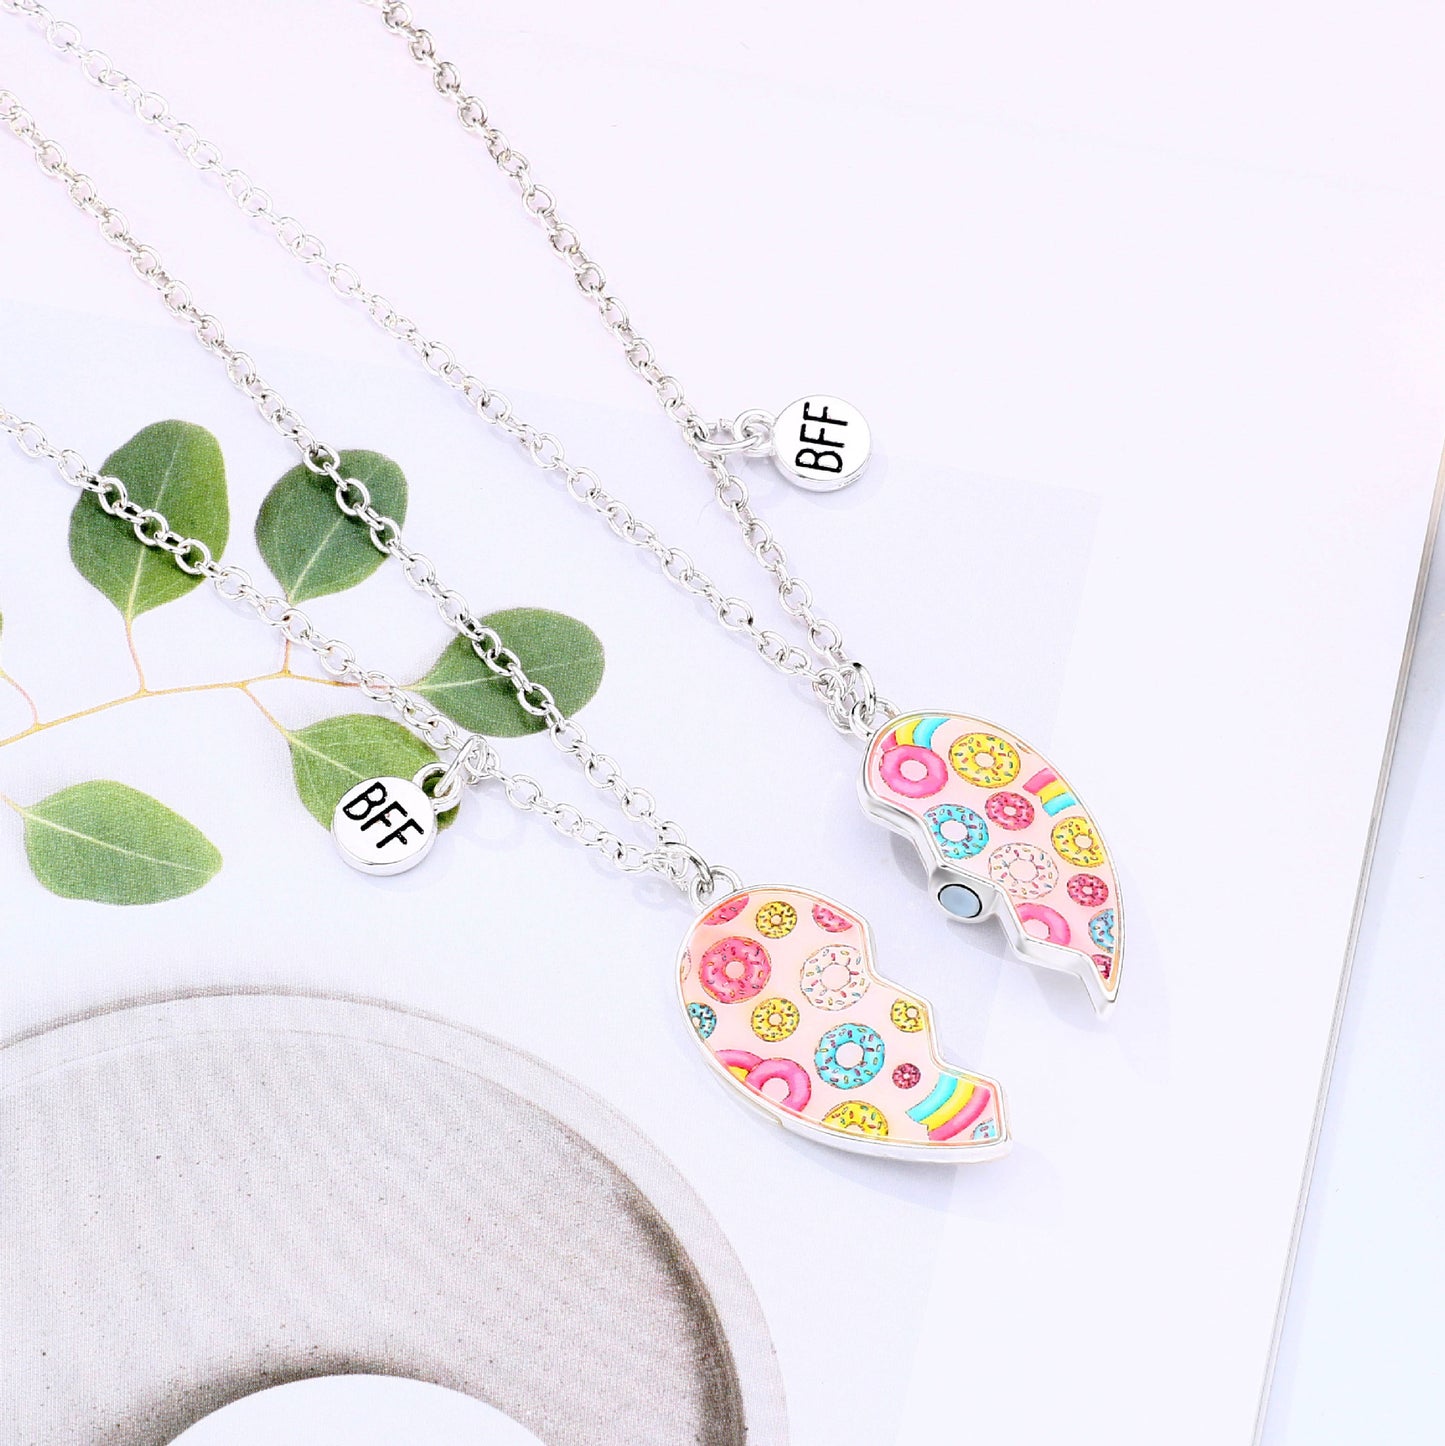 Magnetic Hearts Bff Necklaces Set for Two